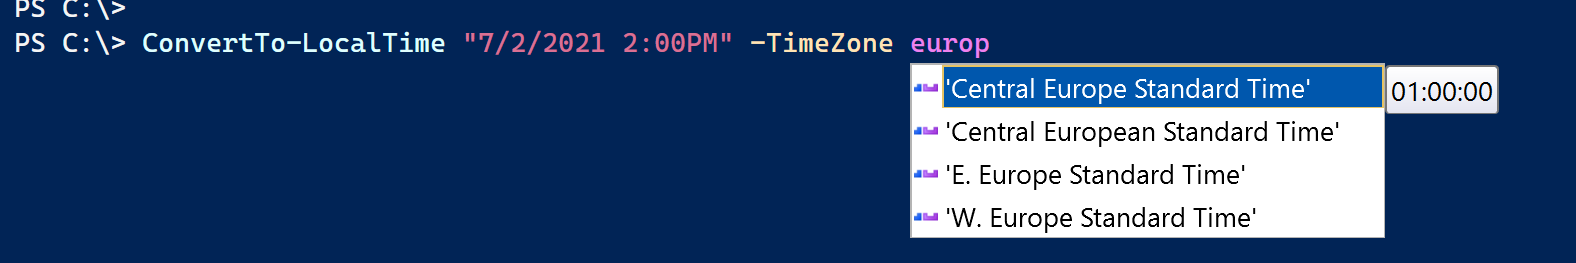 Convert to Local Time PowerShell • Administrator